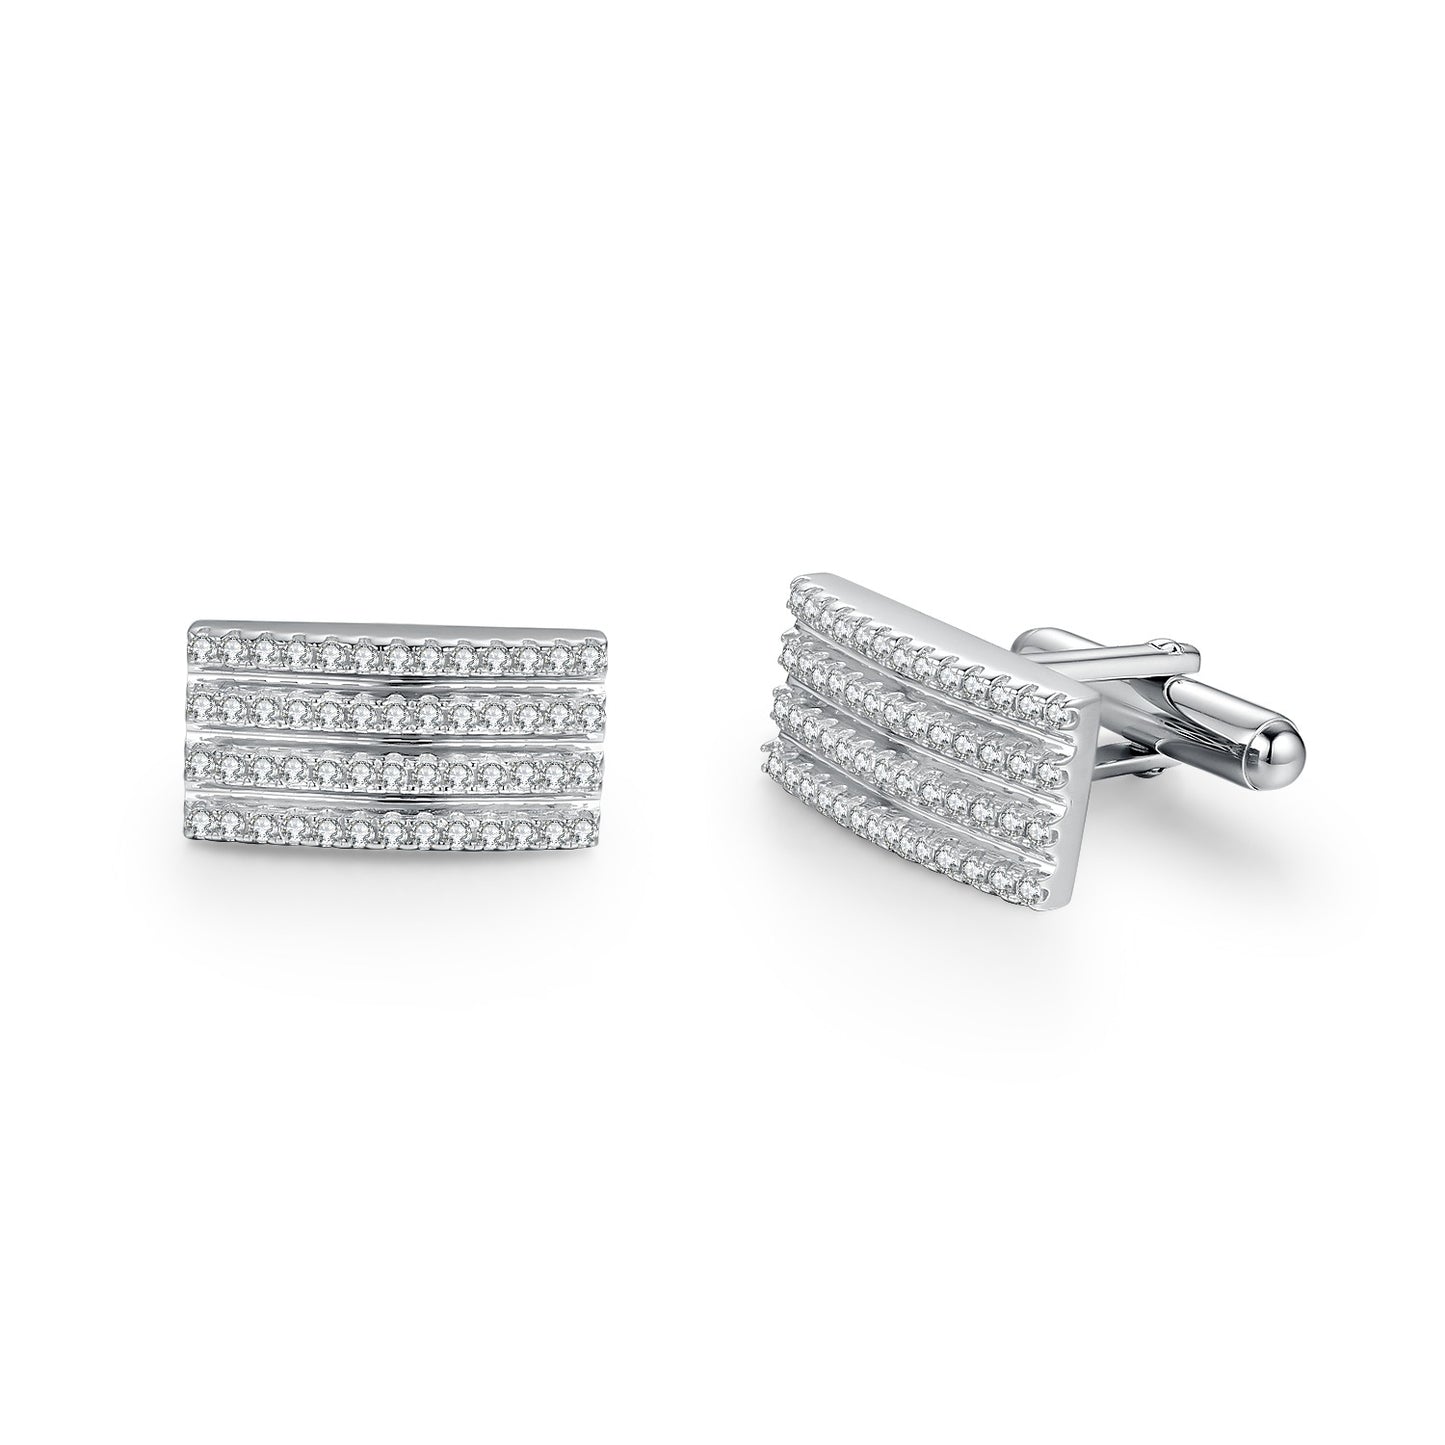 Rhodium Plated Sterling Silver Micropave Striped Cufflinks